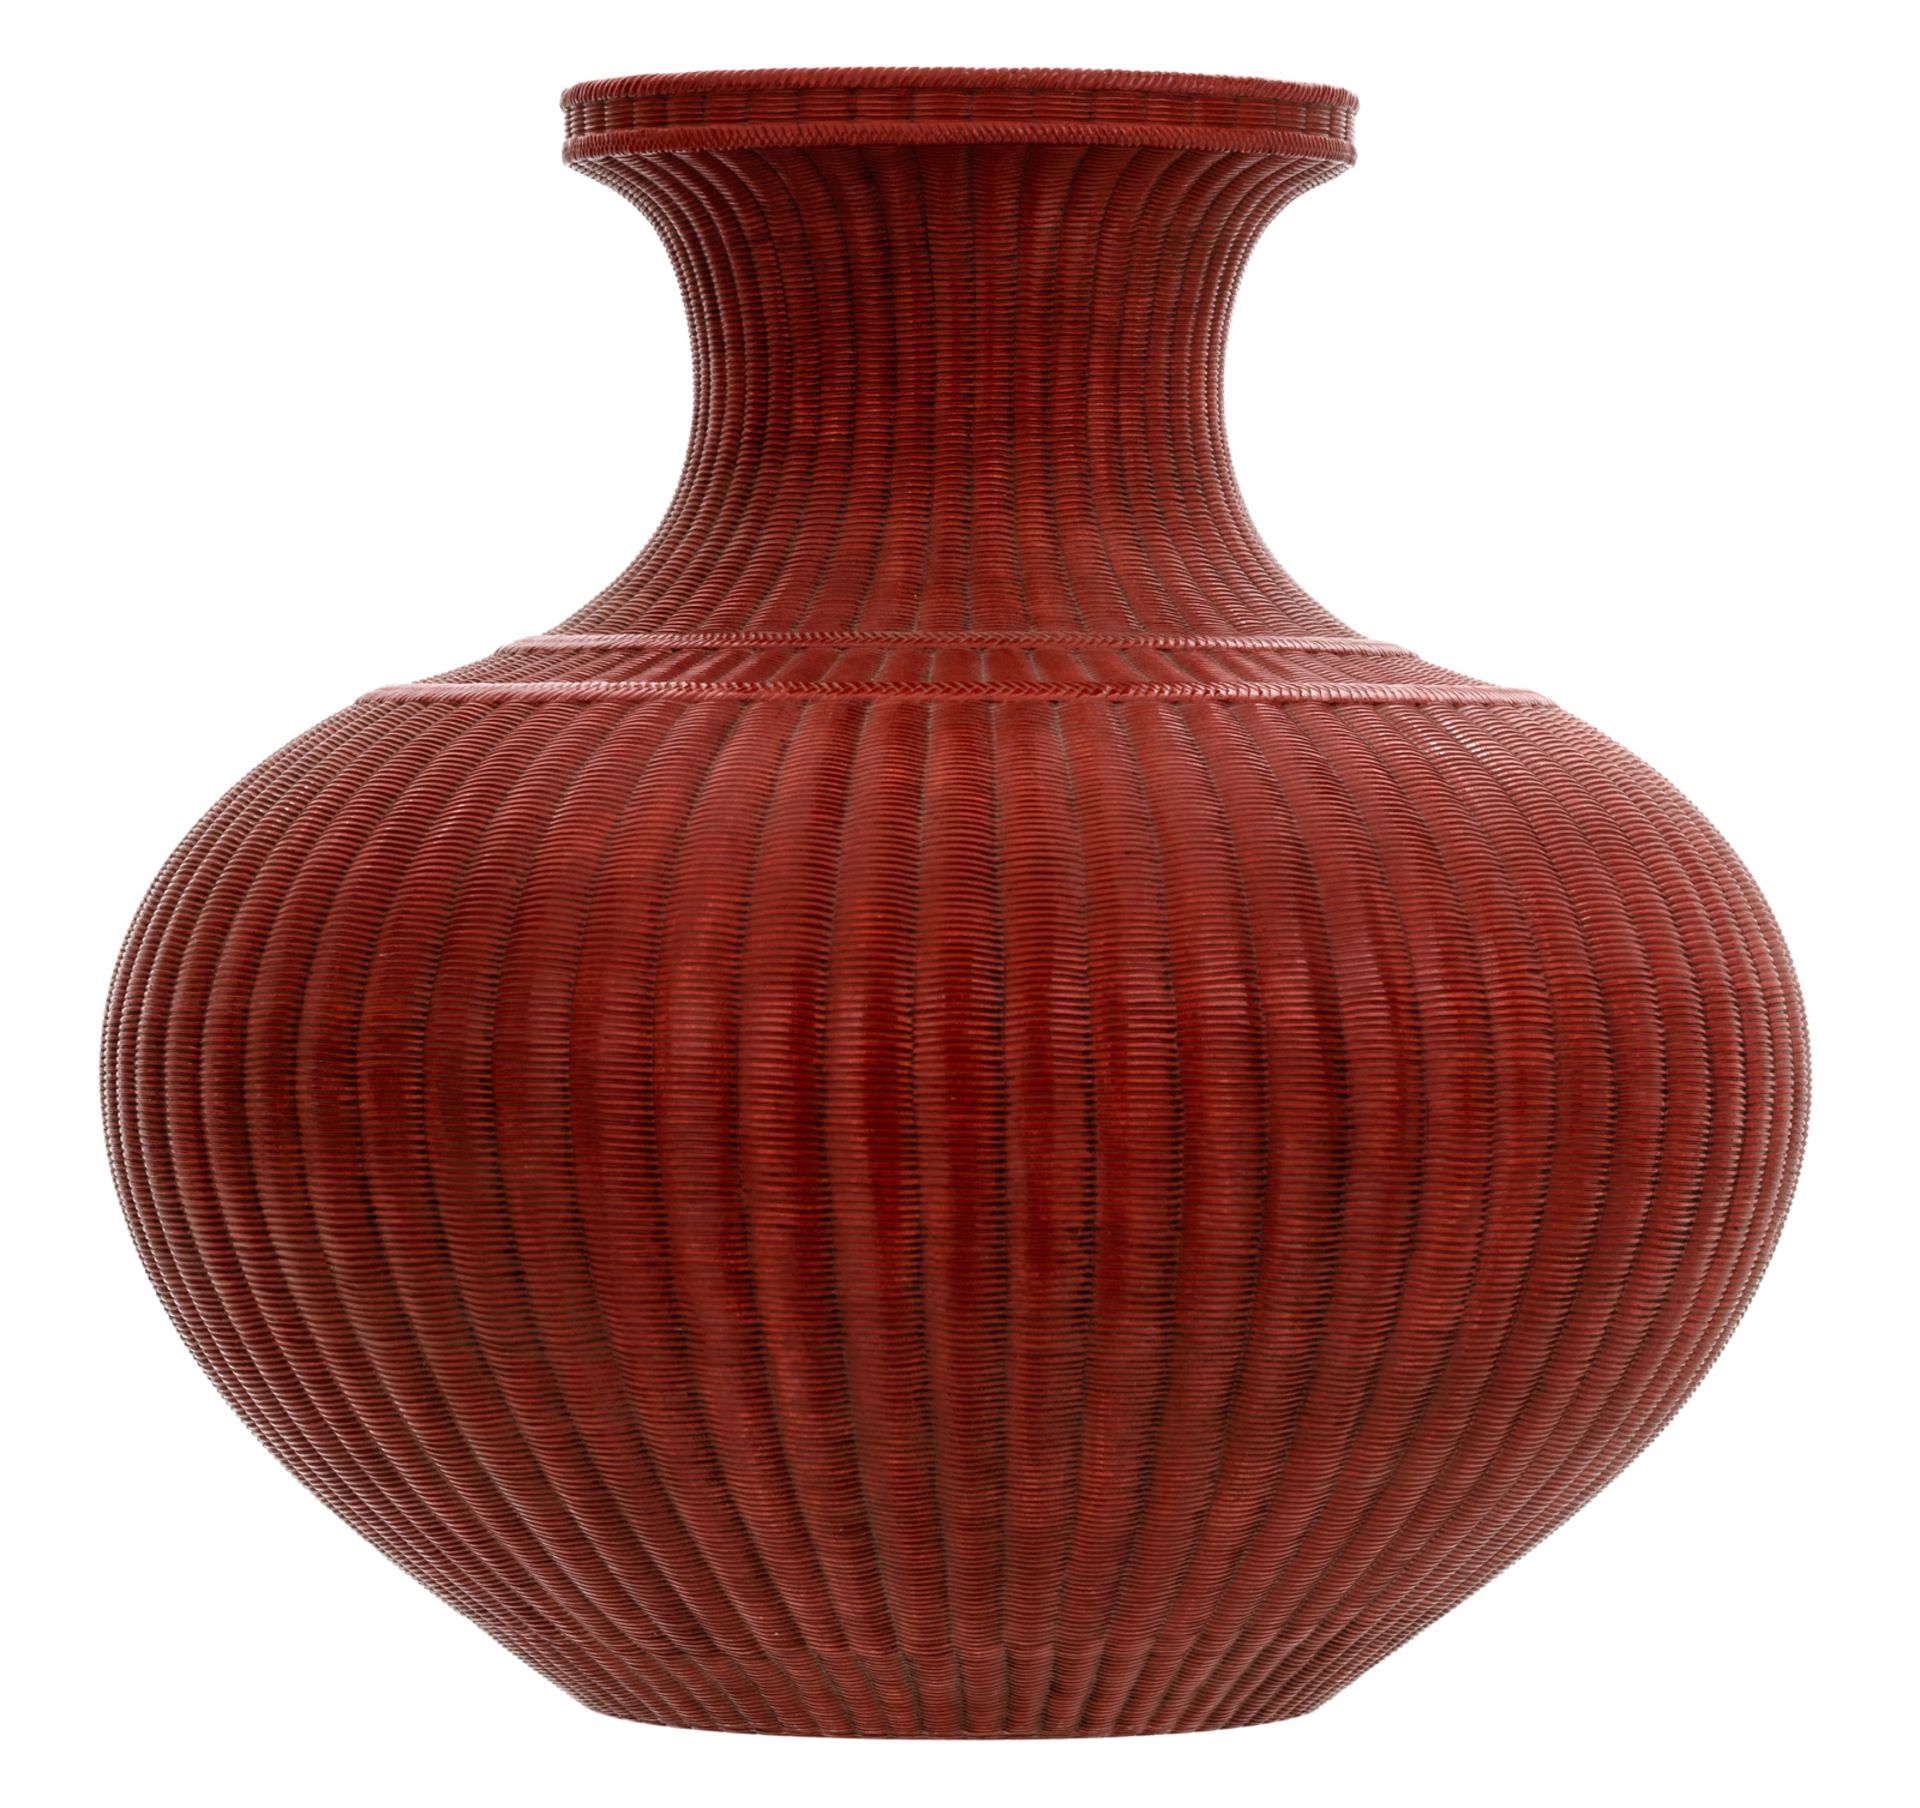 A fine Chinese red brown glazed reed basket shaped vase with a Yongzheng mark, H 40,5 cm